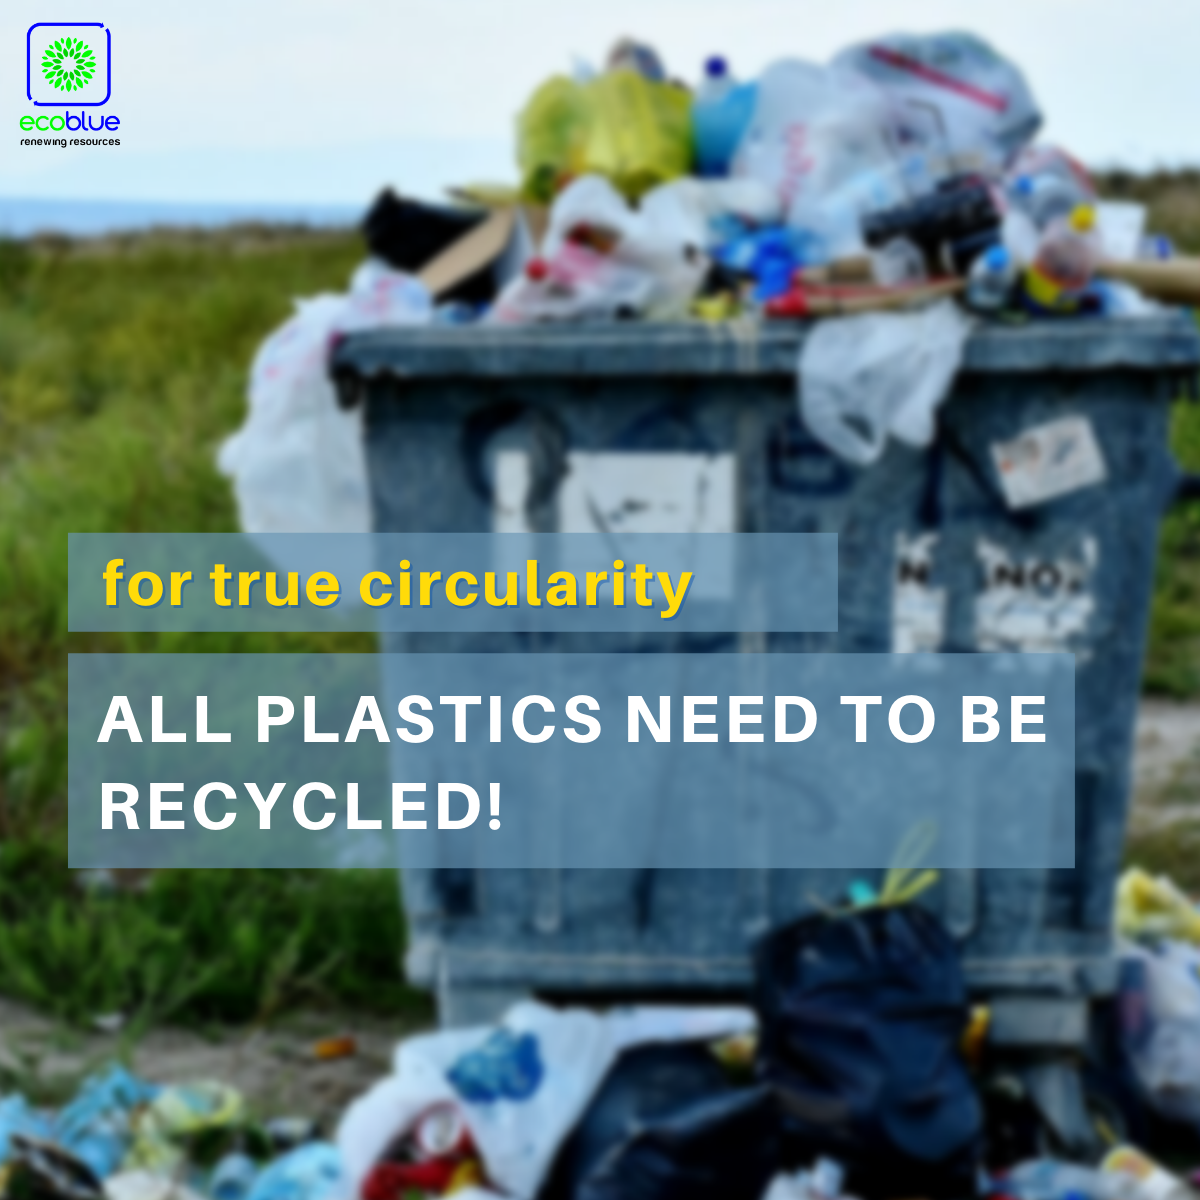 For True Circularity, ALL plastics need to be recycled!